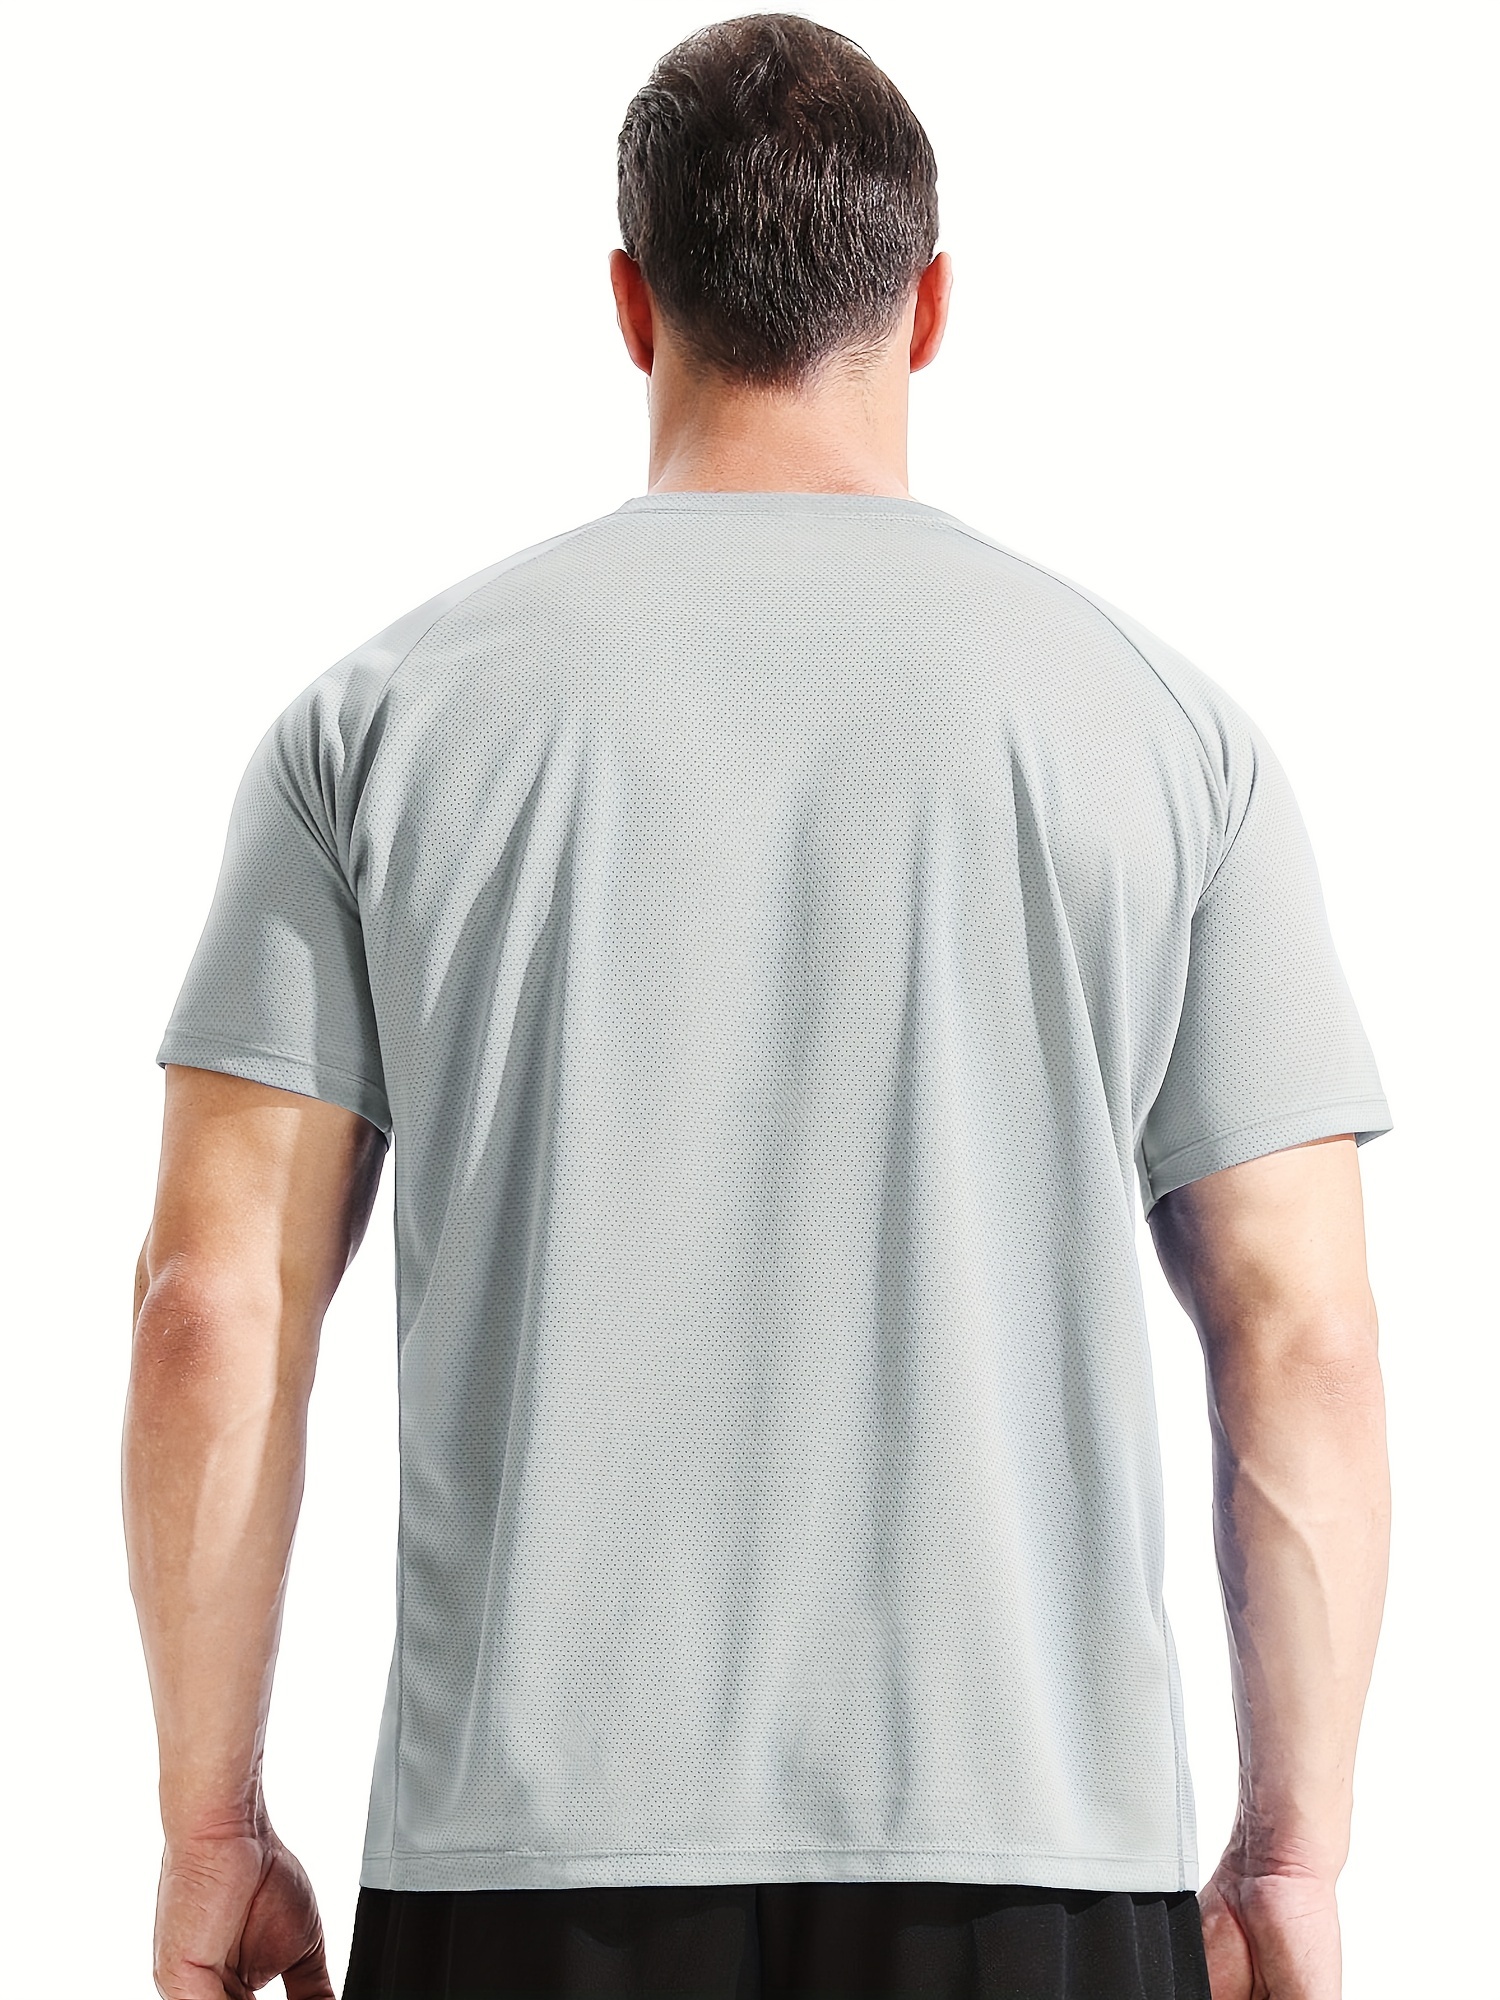 Short Sleeve, mens sports t shirts breathable Wicking, Dry Fit Gym